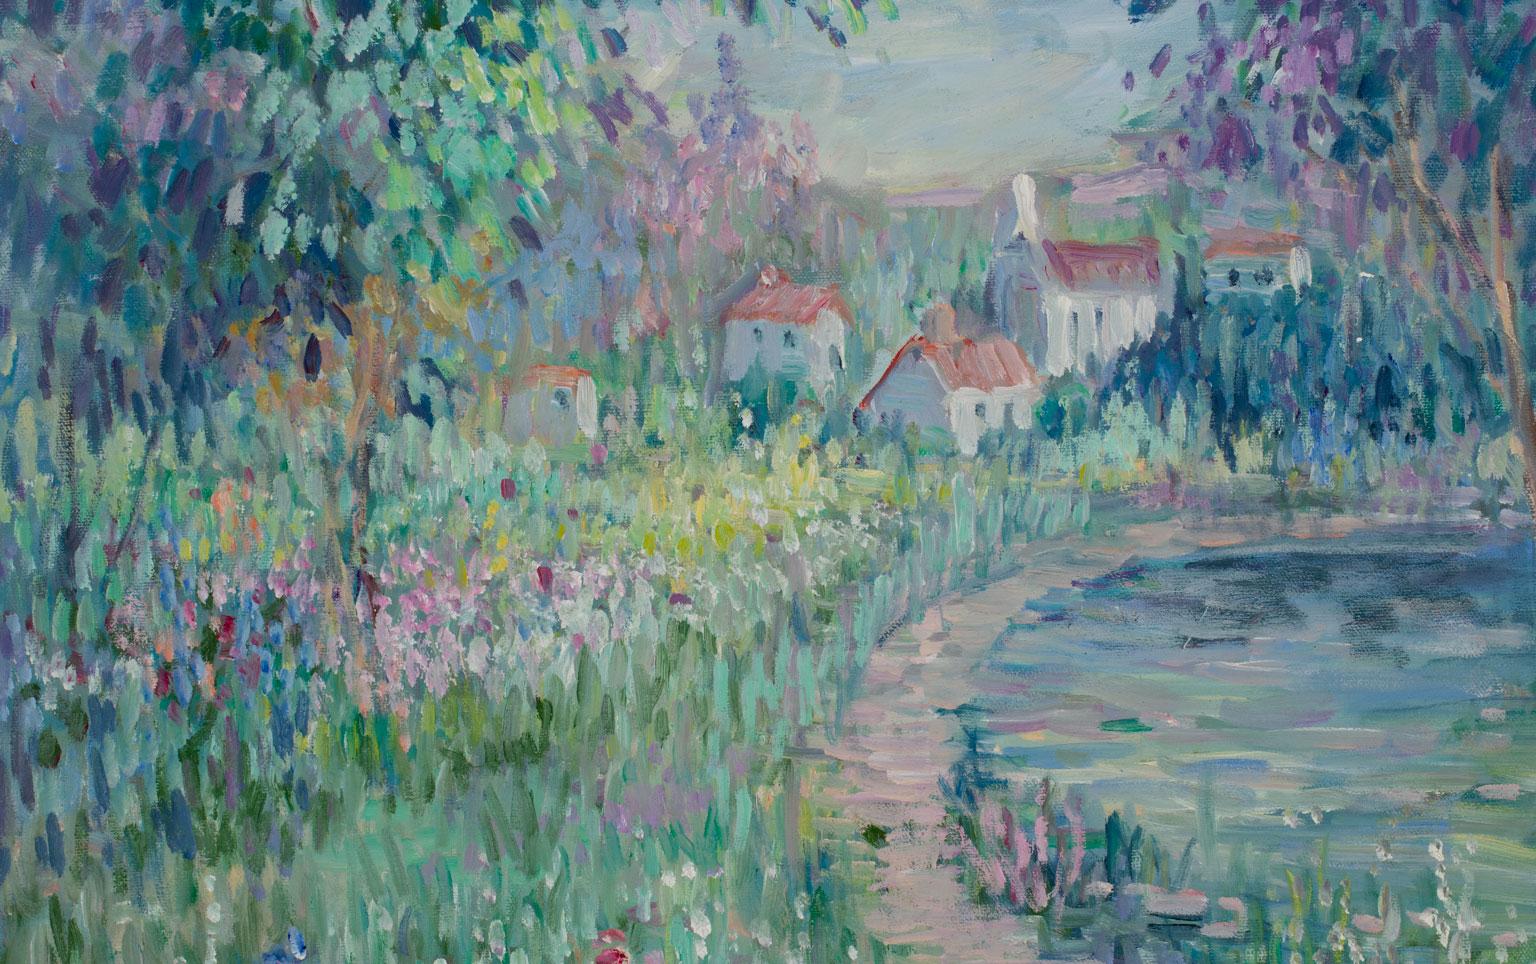 Untitled Landscape, an original oil on canvas by Irene Borg, is a piece for the true collector. The viewer is invited to step into the painting to explore the scene within and imagine gazing at an easel of a plein-air painter with the greenery and